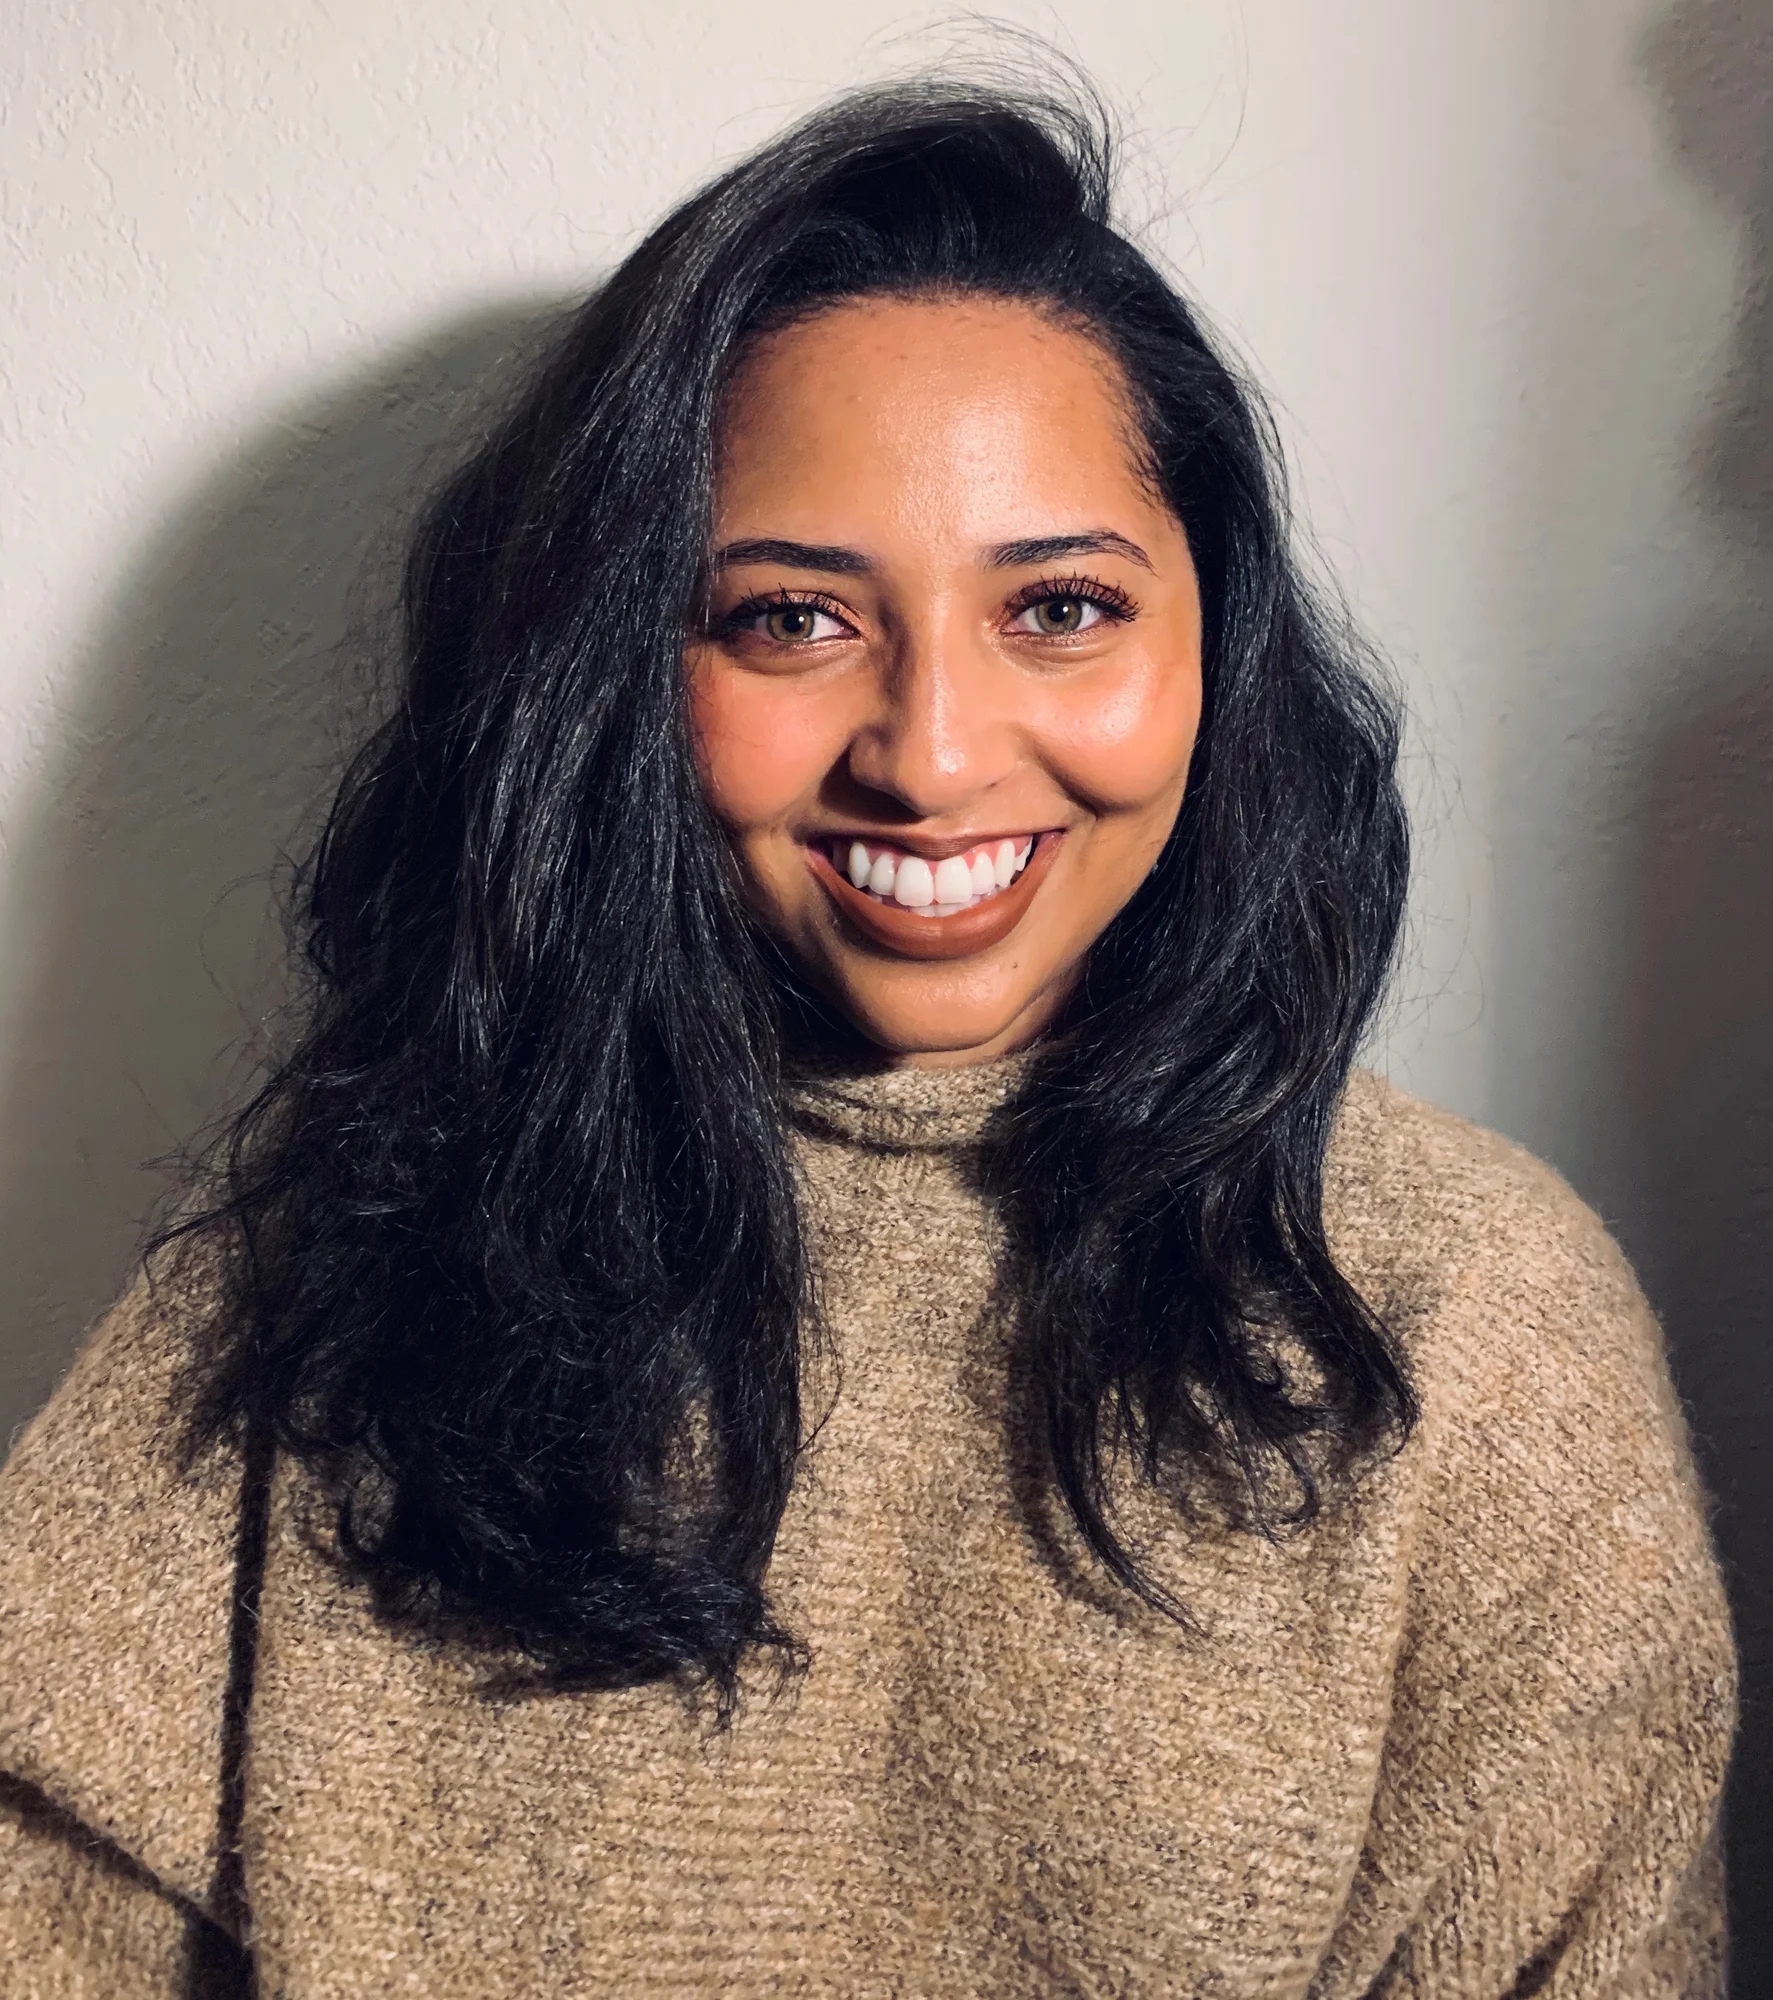 A photograph of Cherish looking into the camera and smiling. She is swearing a khaki colored sweater.